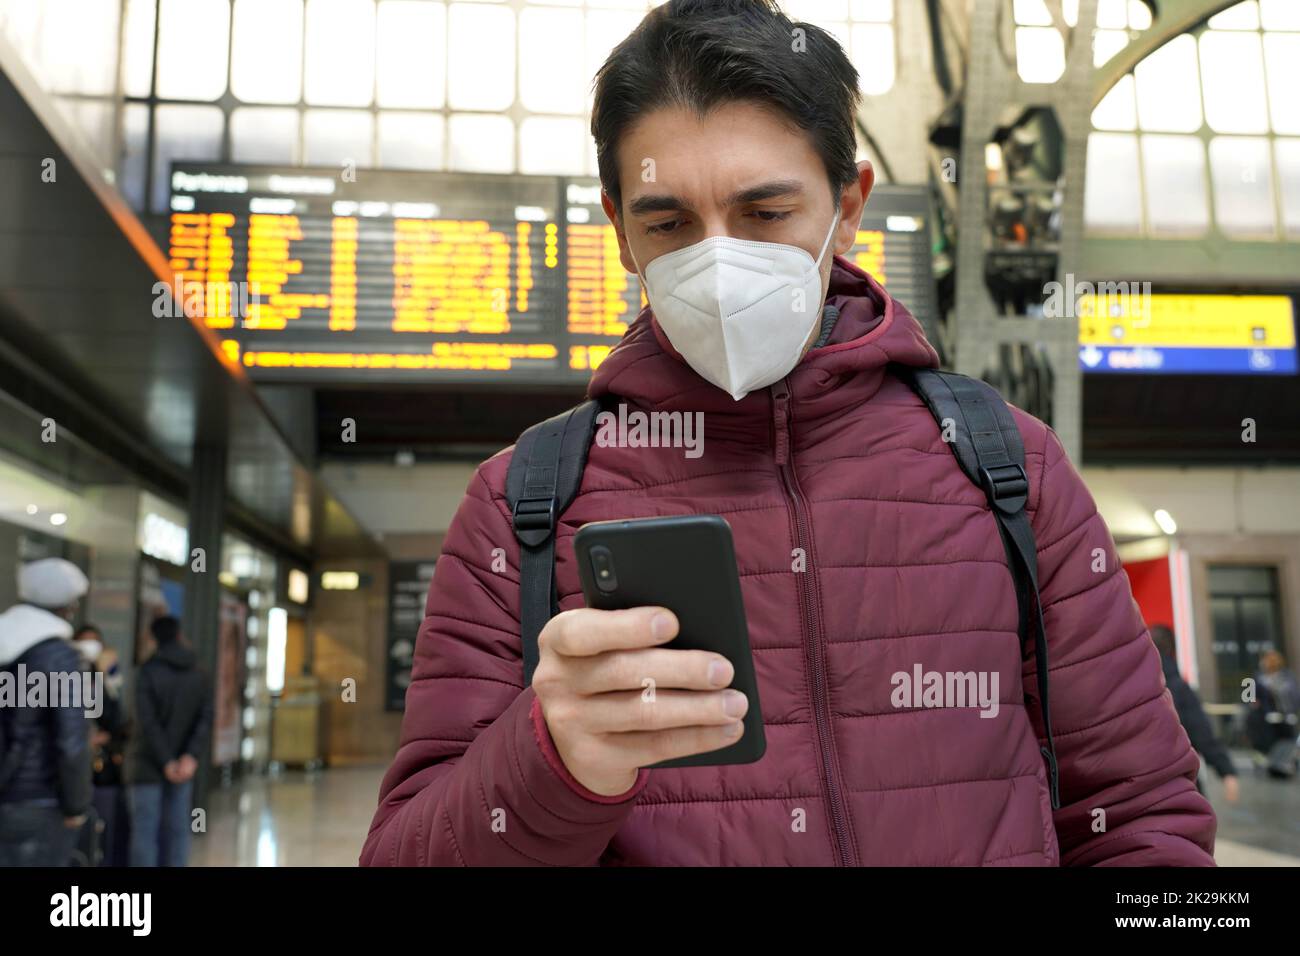 Traveler man wearing KN95 FFP2 protective face mask at the airport. Young caucasian man with behind timetables board of departures arrivals checking online ticket of his flight. Stock Photo